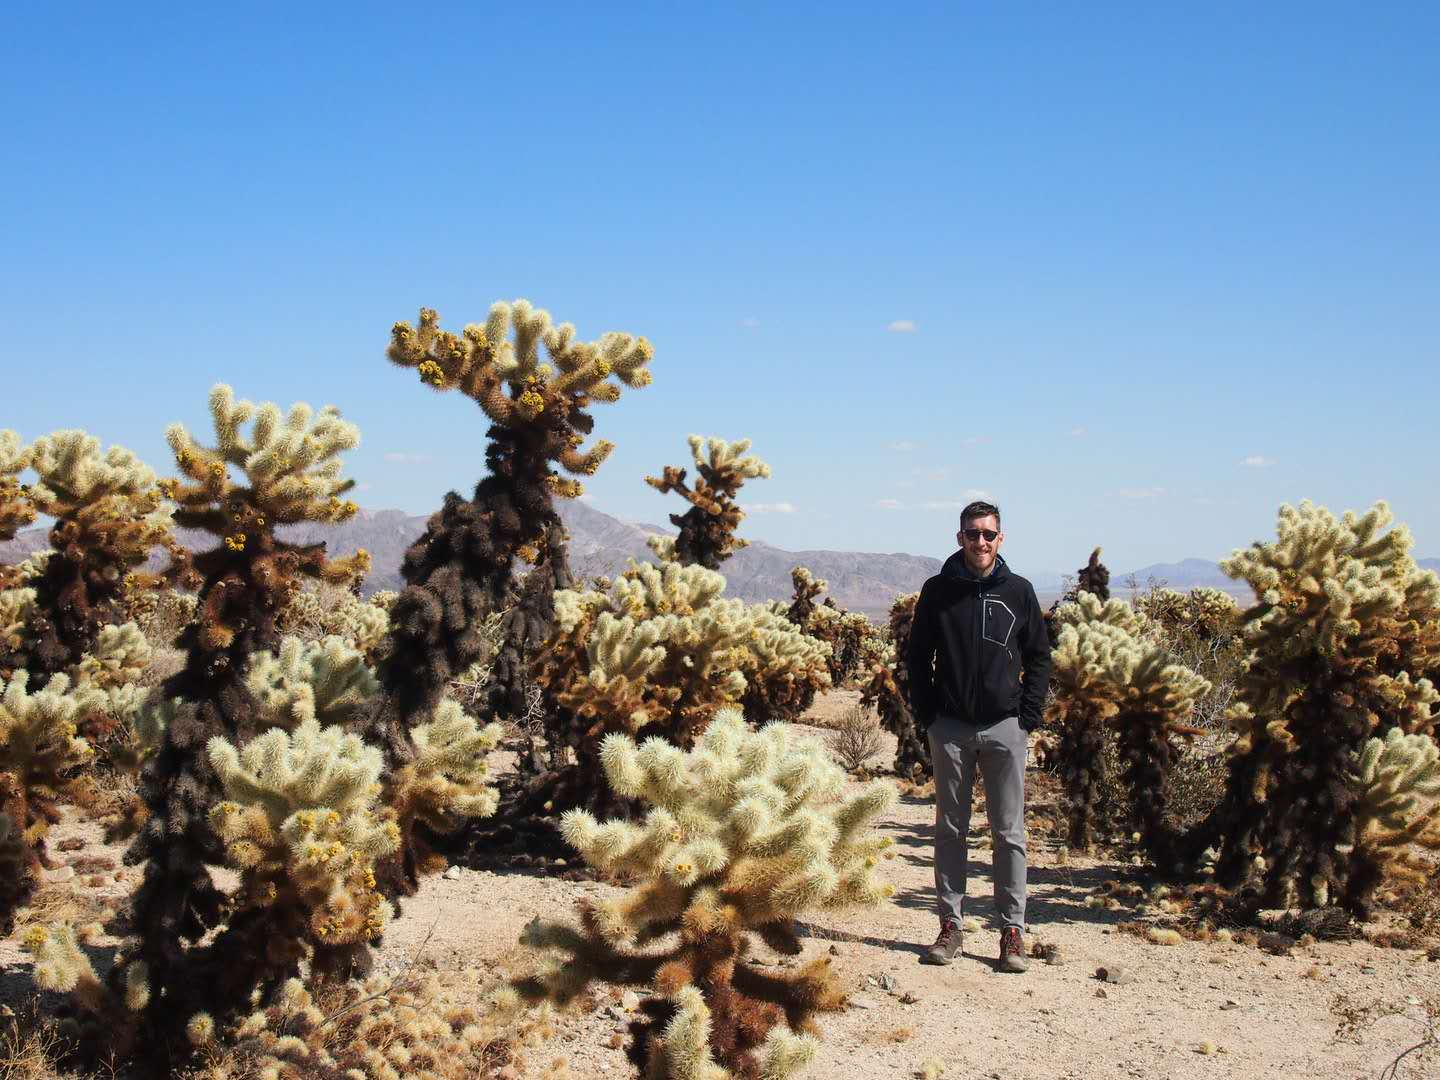 Scott Mallinson standing in a southern California desert surrounded by cacti